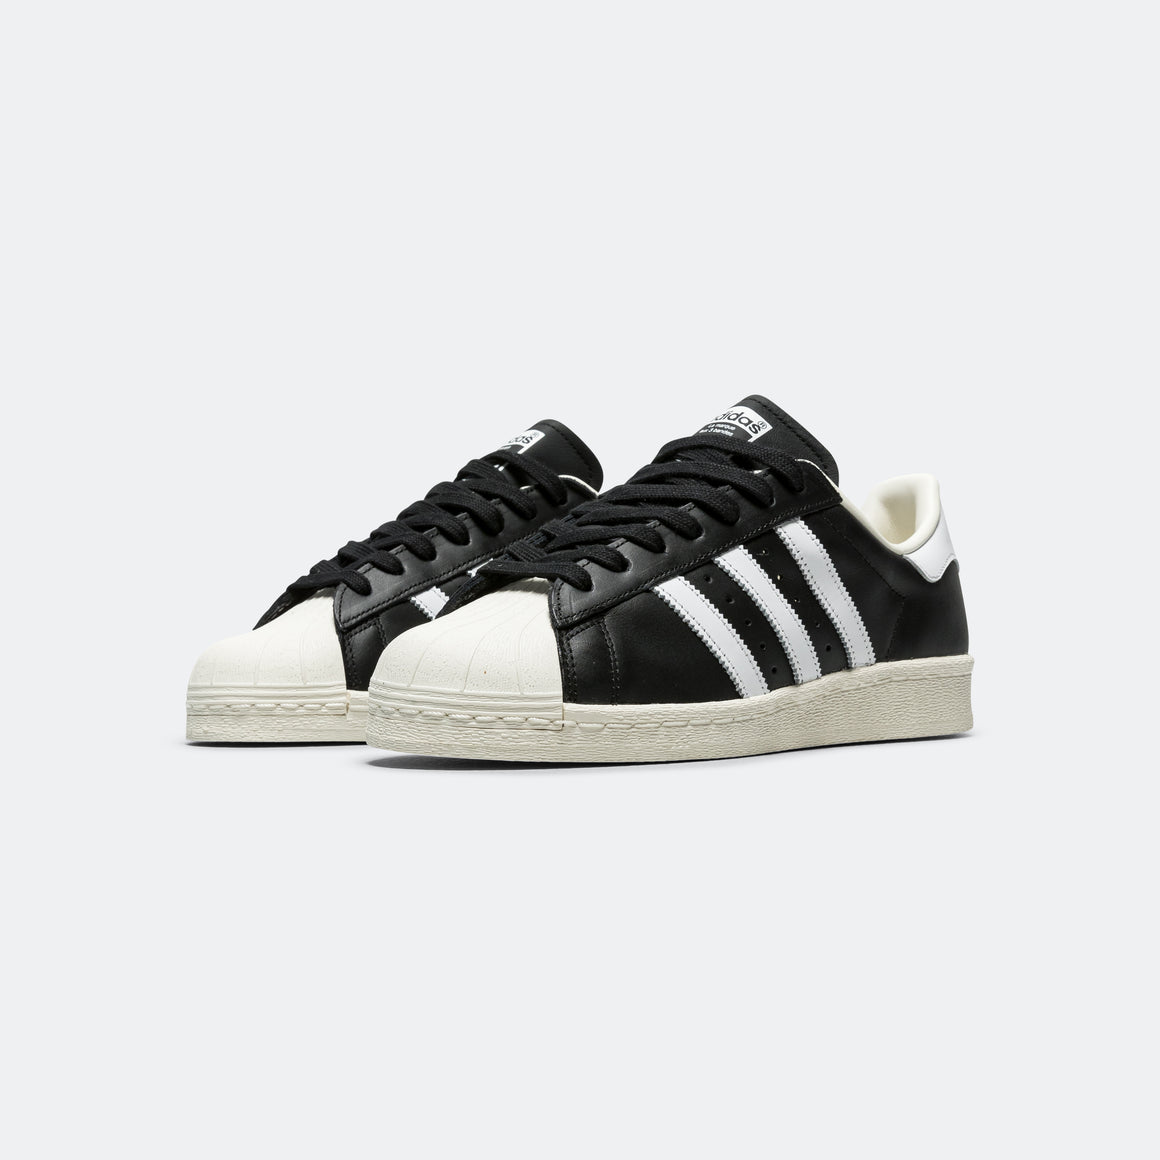 adidas - Superstar 82 - Core Black/Cloud White-Off White - UP THERE